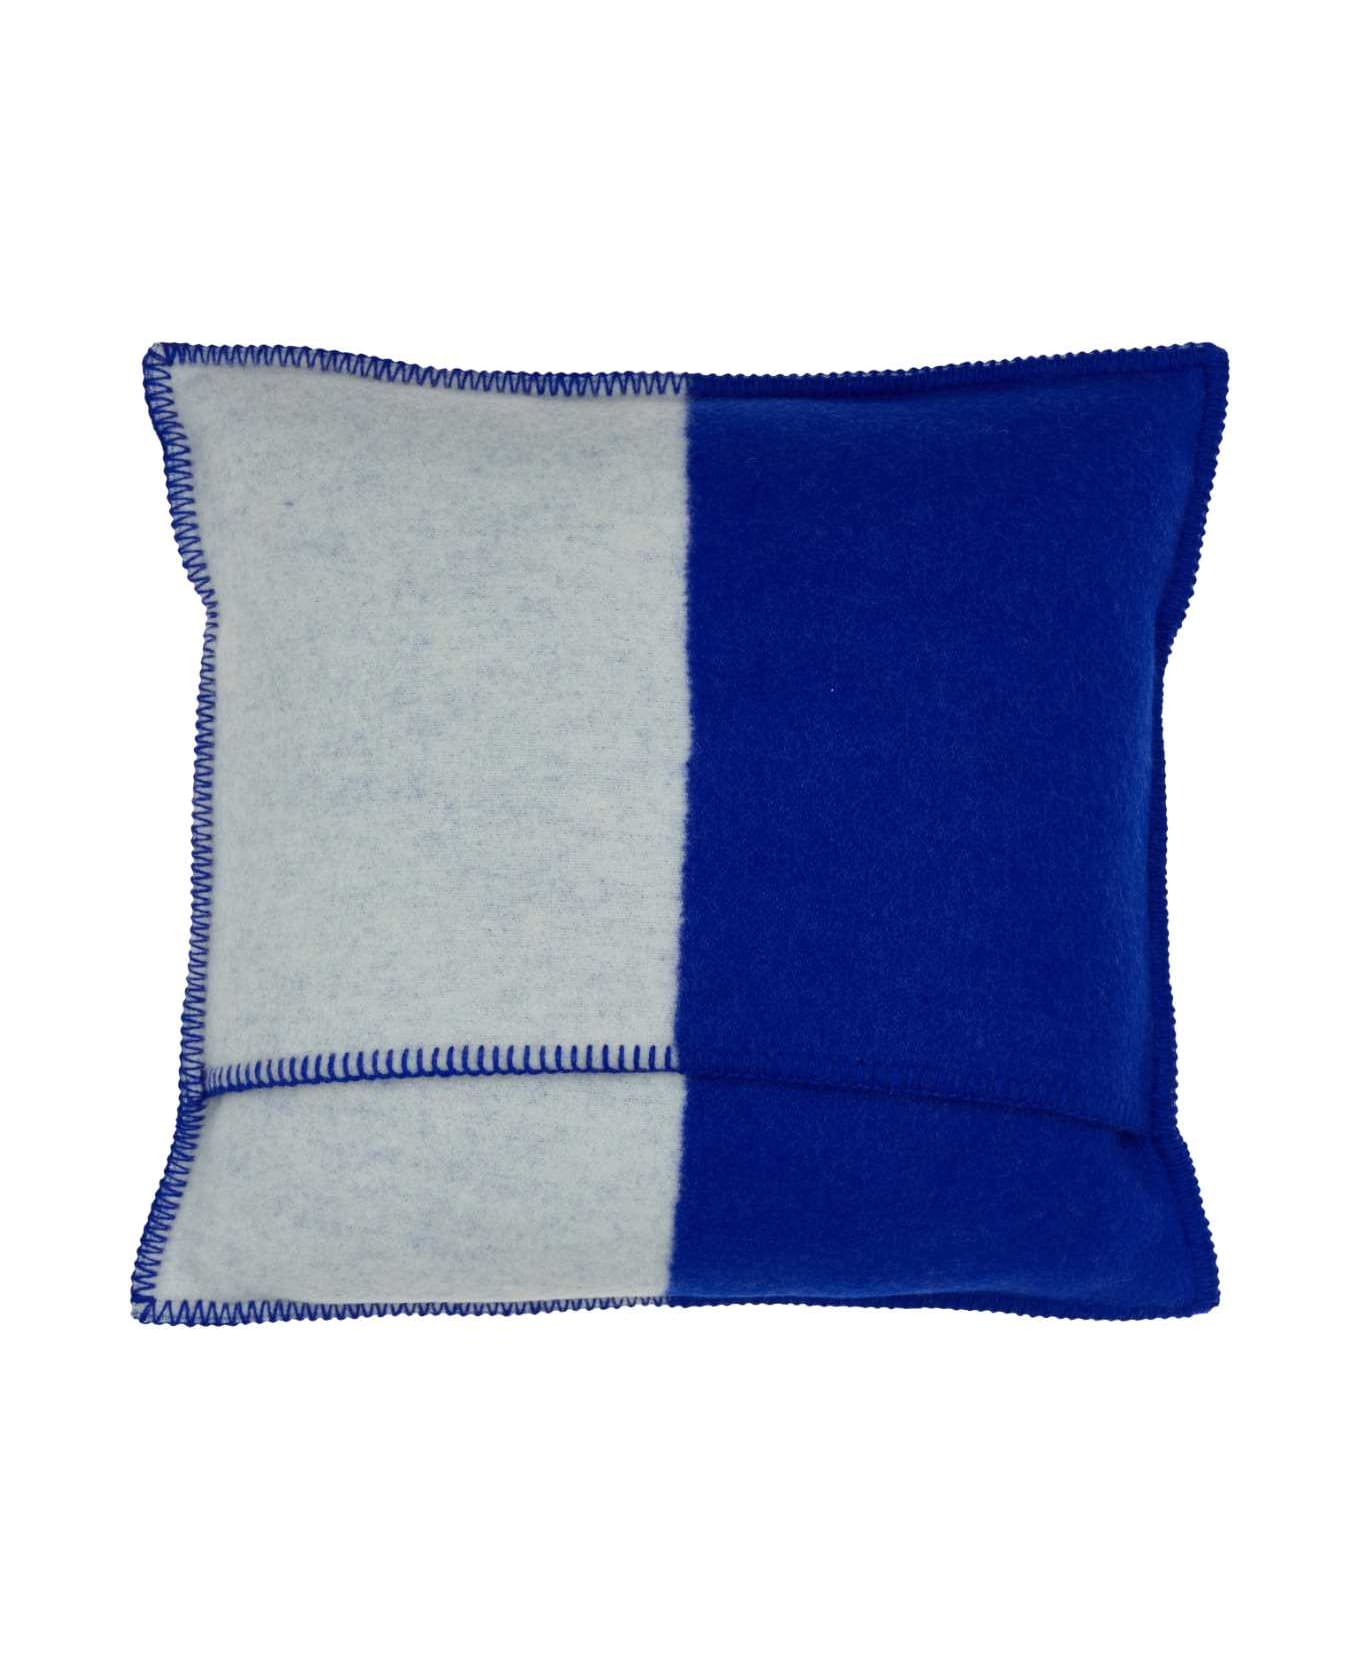 Burberry Two-tone Wool Pillow - KNIGHT